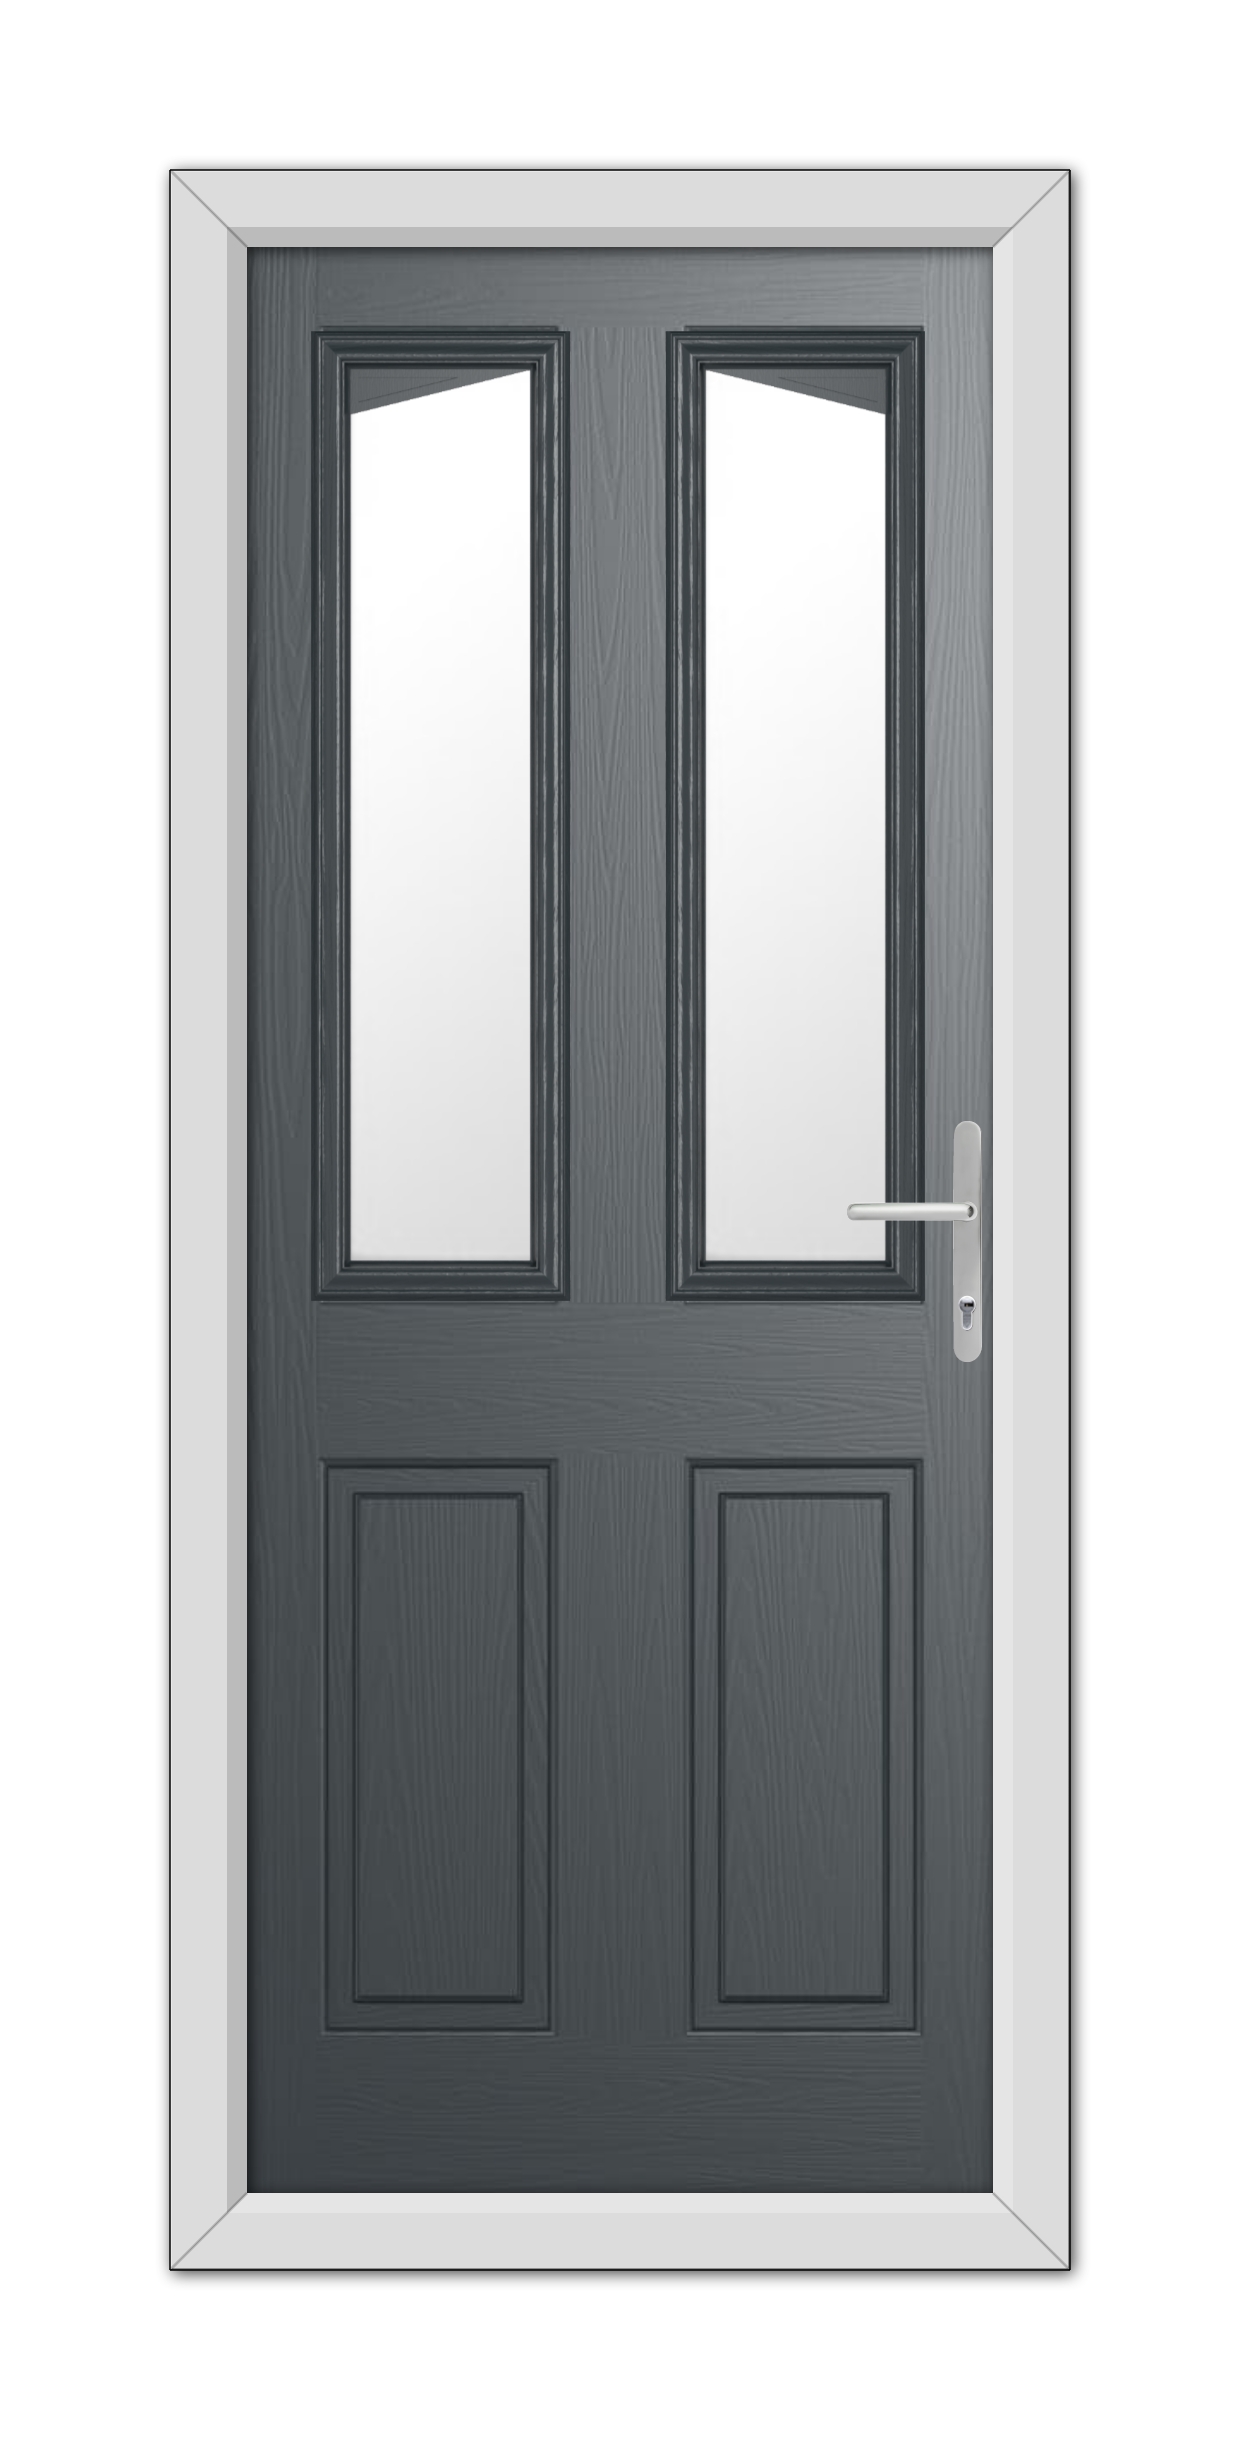 Anthracite Grey Highbury Composite Door with vertical glass panels and a modern handle, set within a white frame.